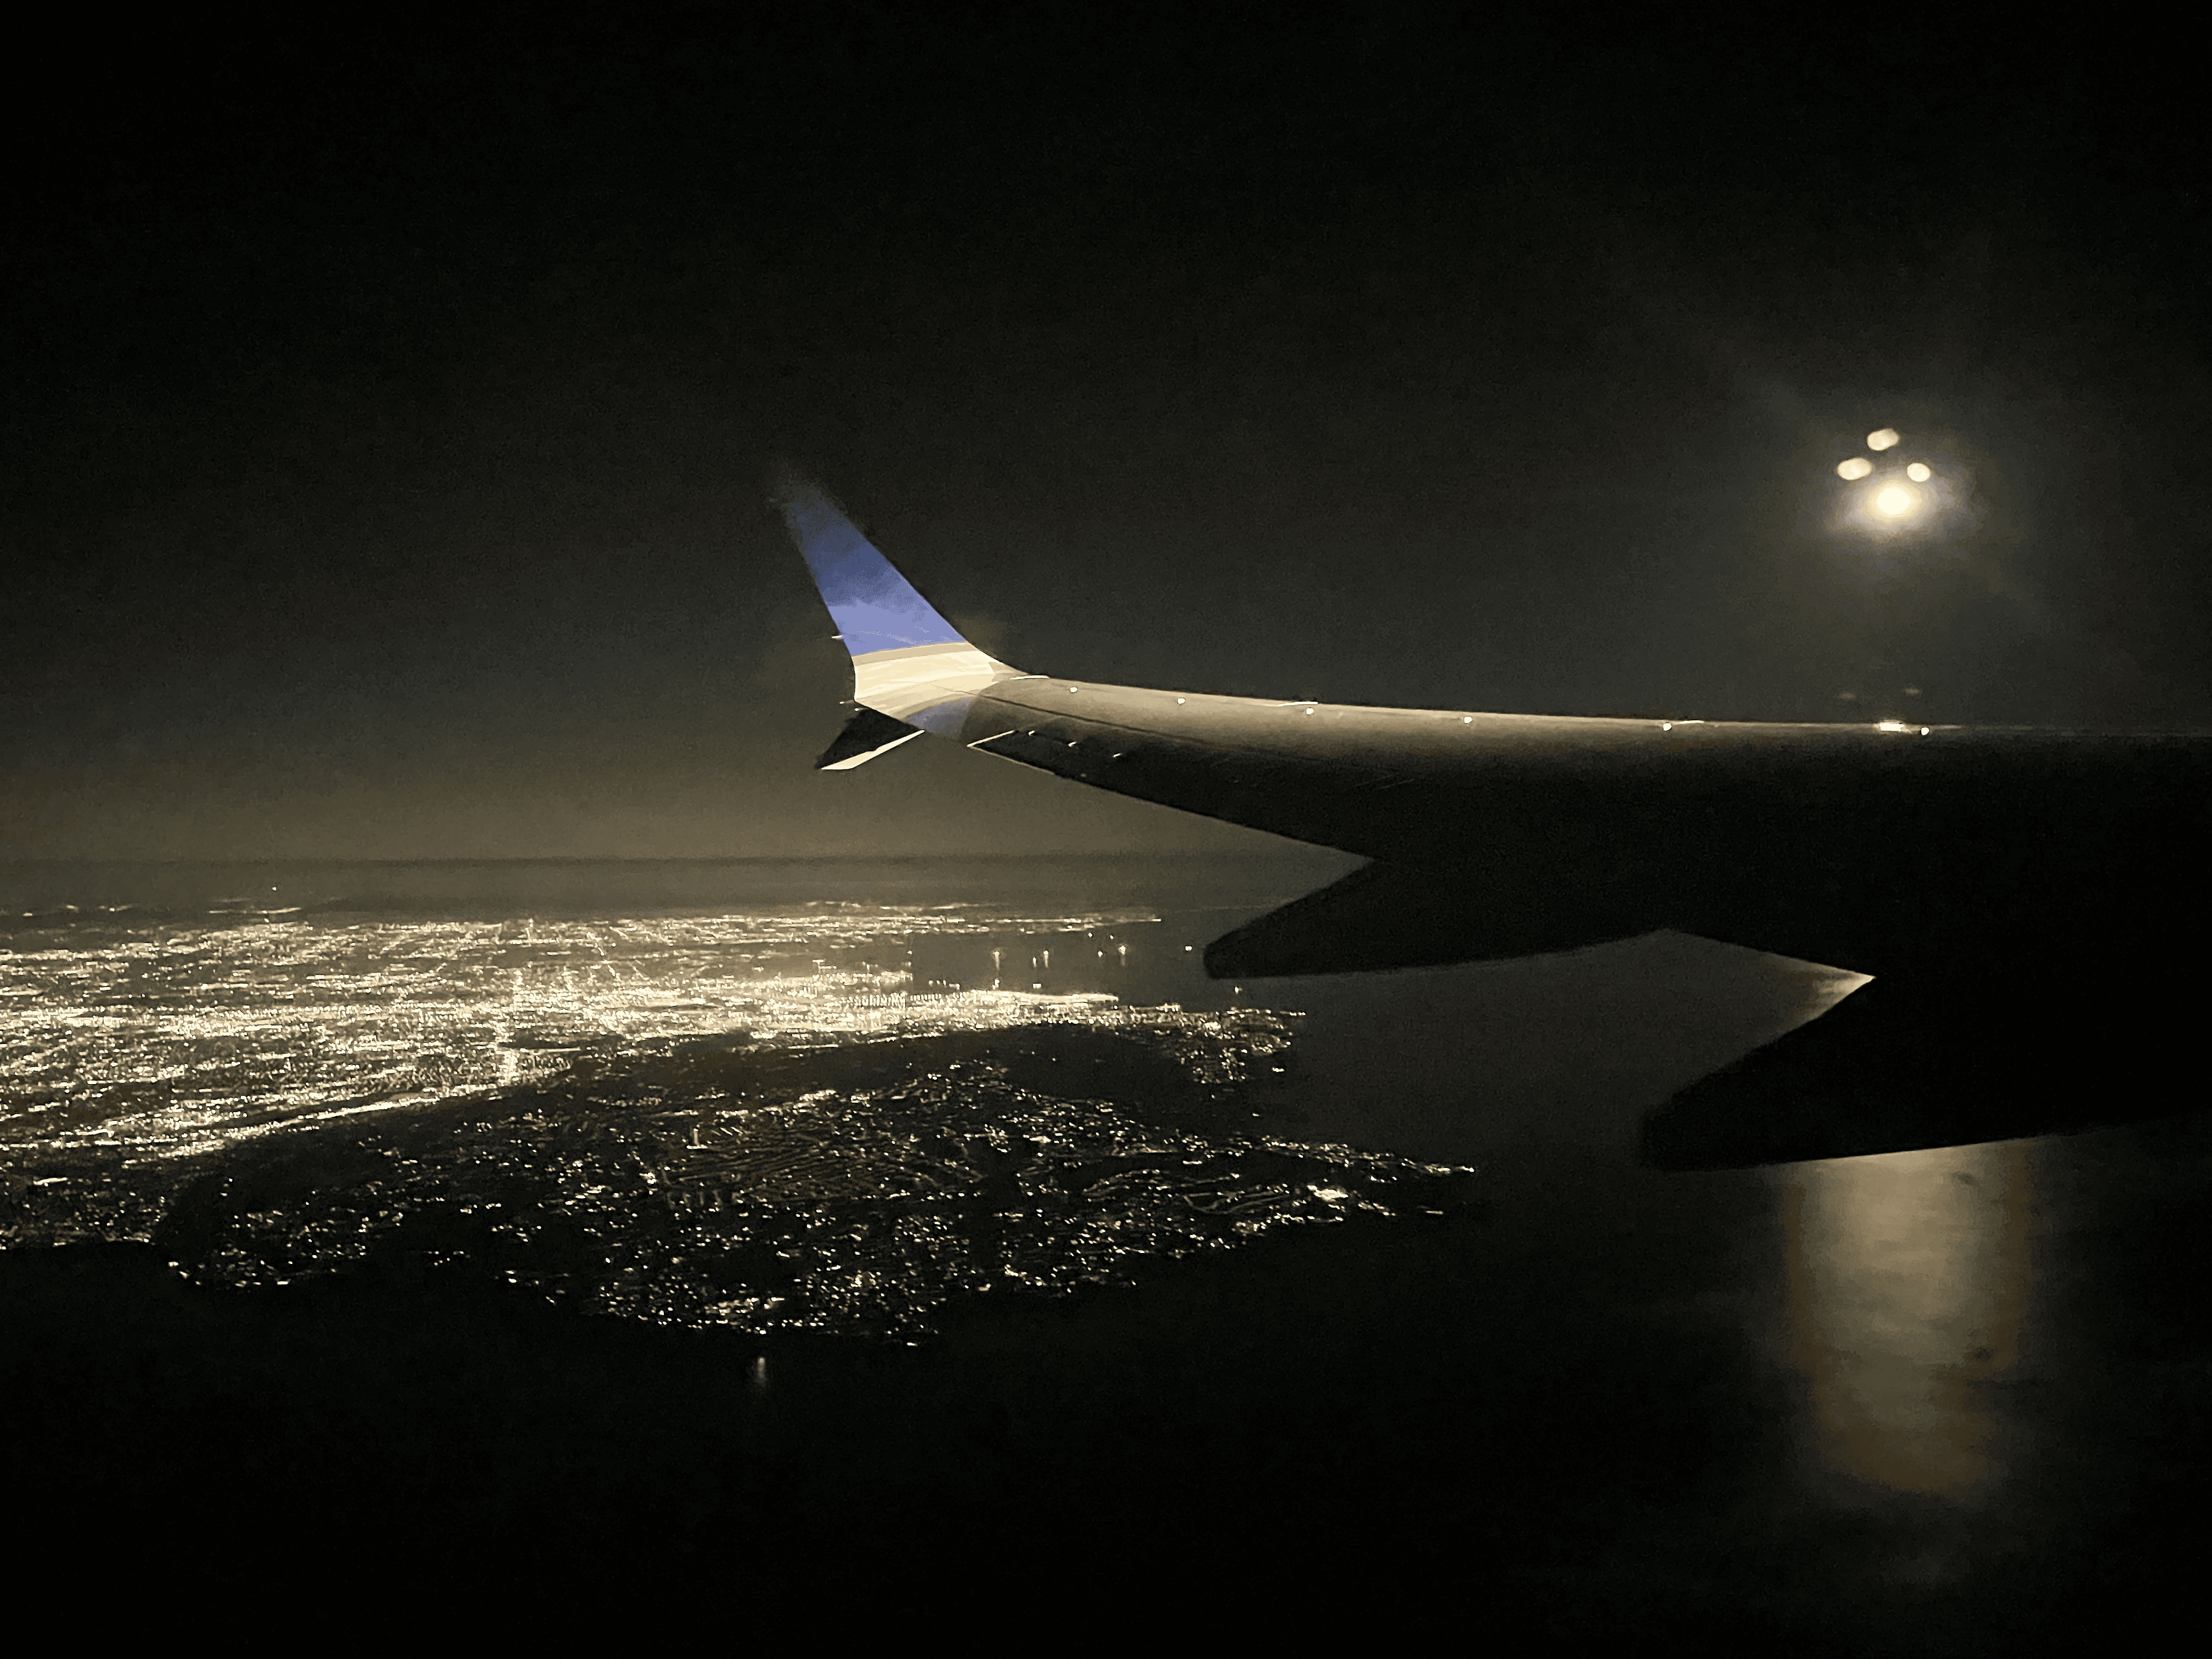 South Bay at night from a plane